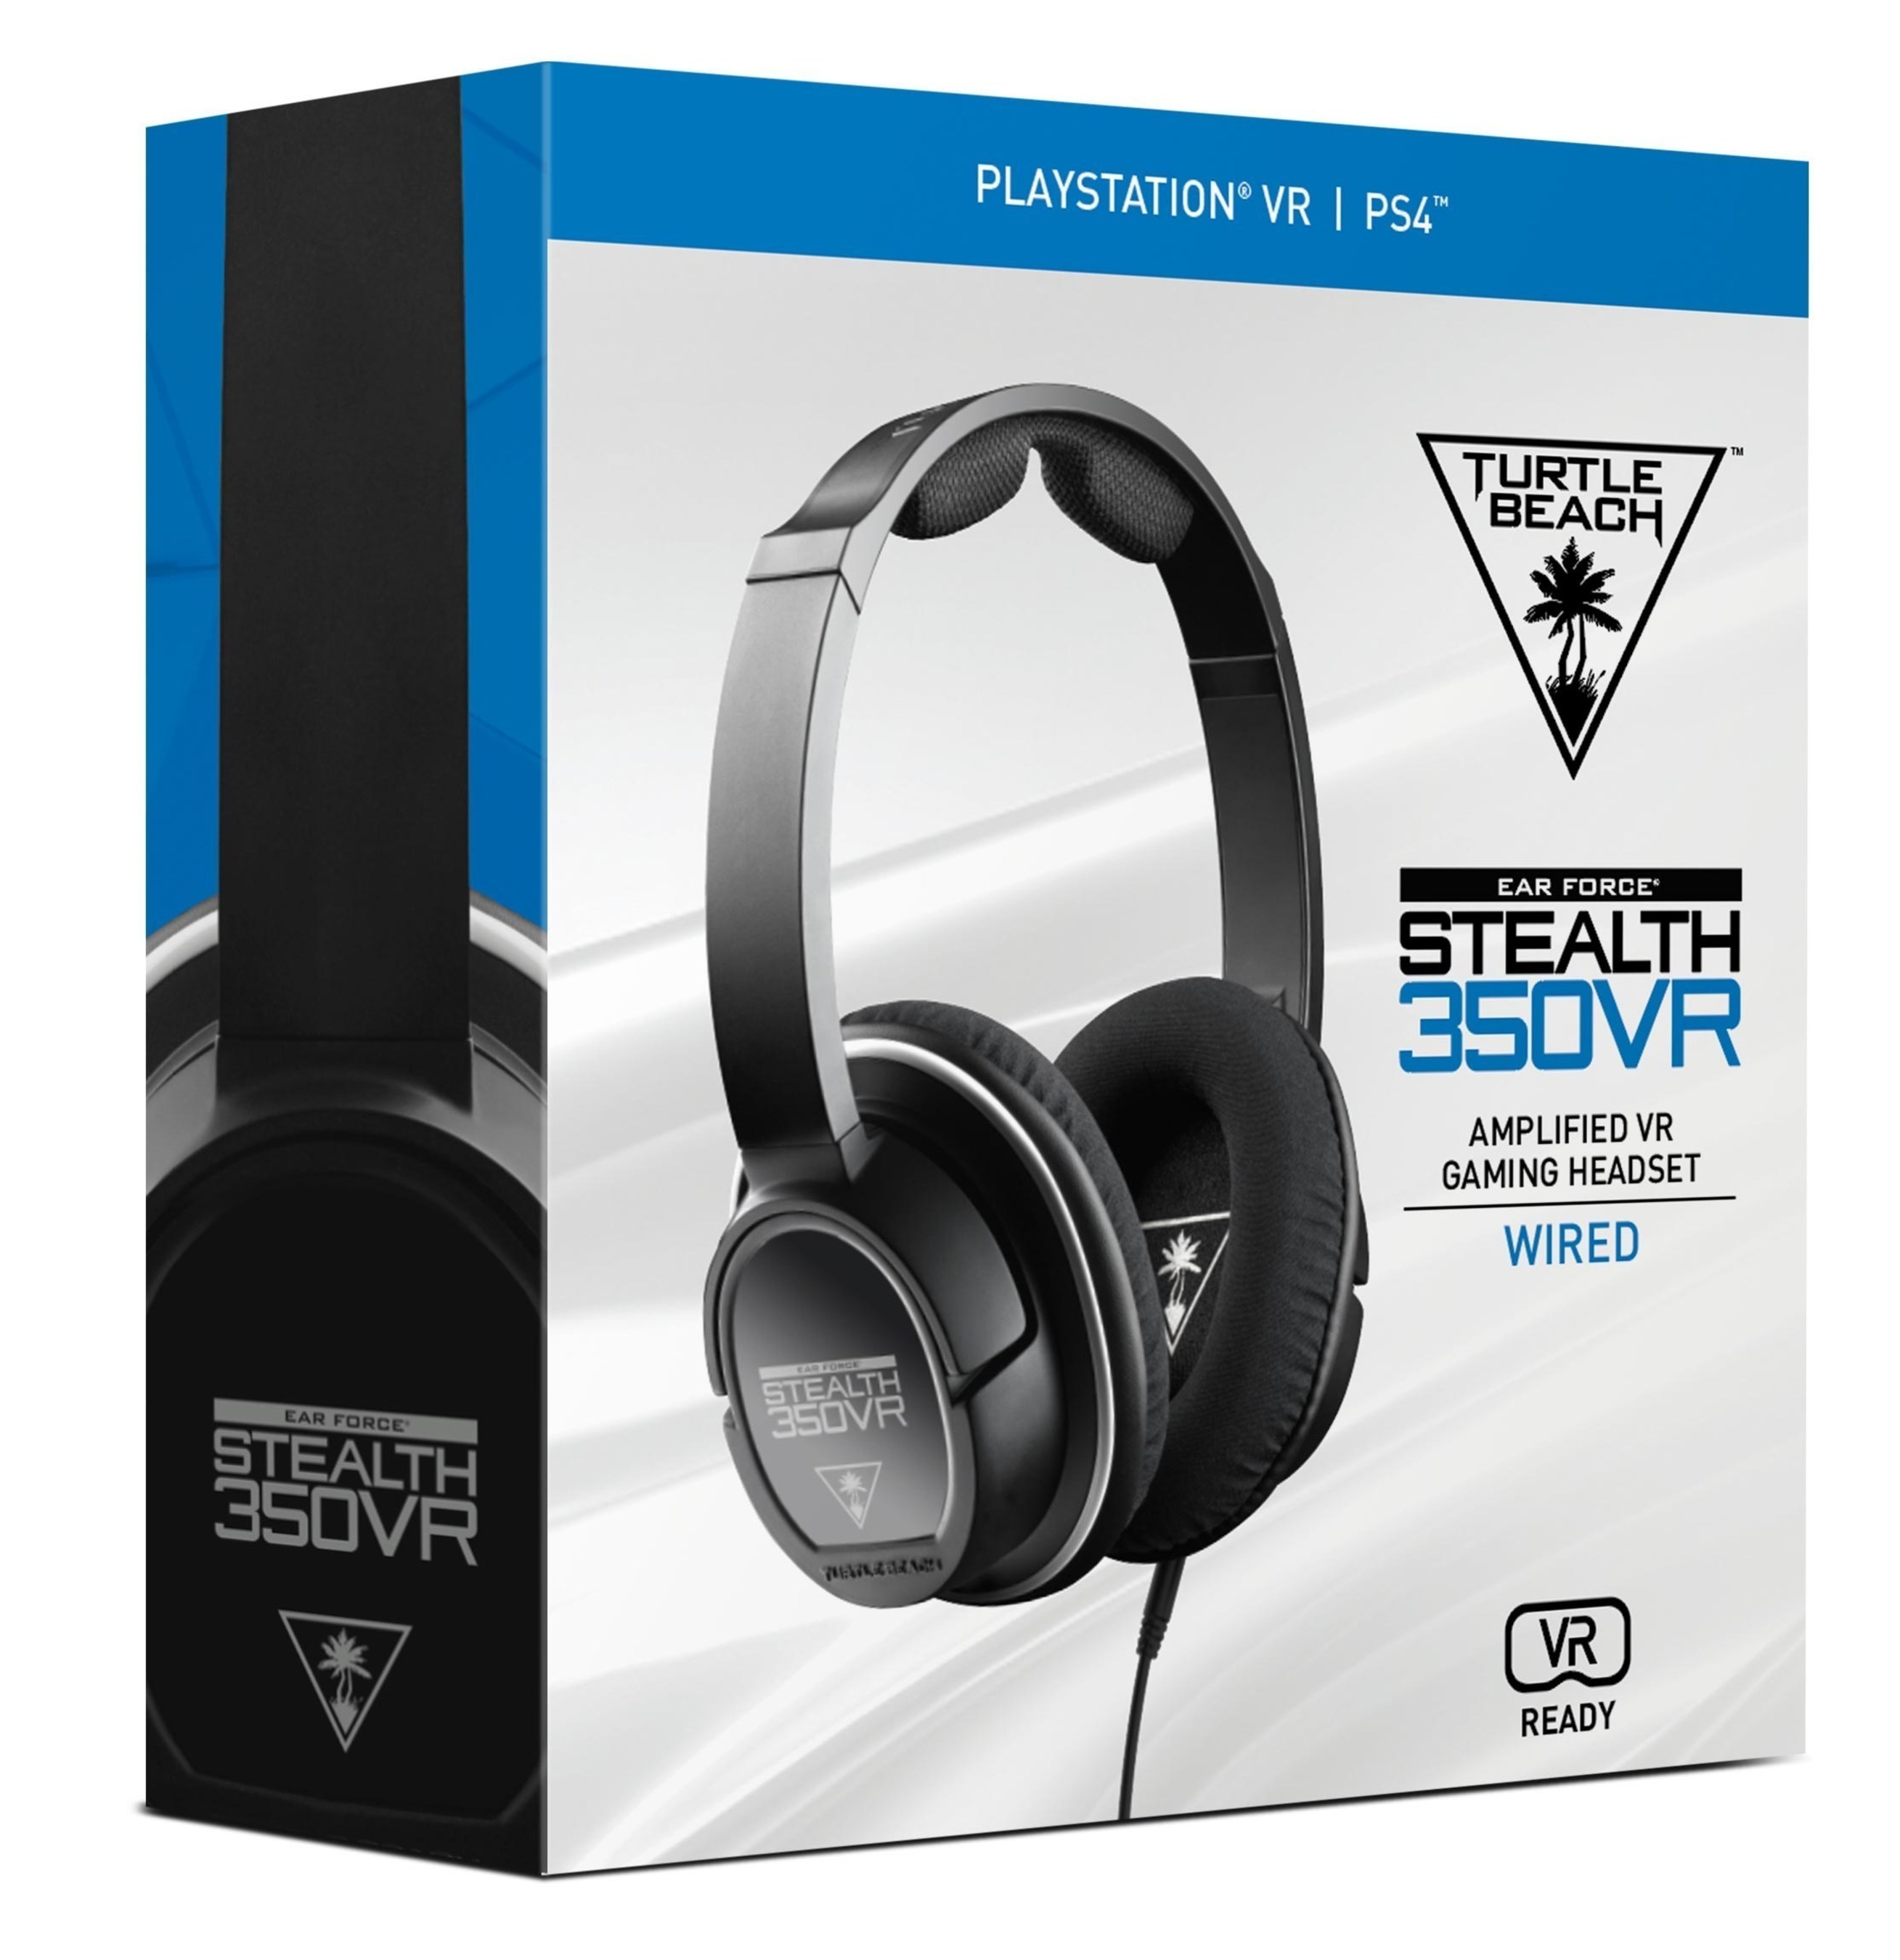 Turtle Beach's all-new STEALTH 350VR headset elevates VR gaming audio from good to amazing, with battery-powered amplification, Bass Boost, 3D surround sound, and a lightweight and comfortable "built for VR" design. Available at participating retailers nationwide for a MSRP of $79.95.